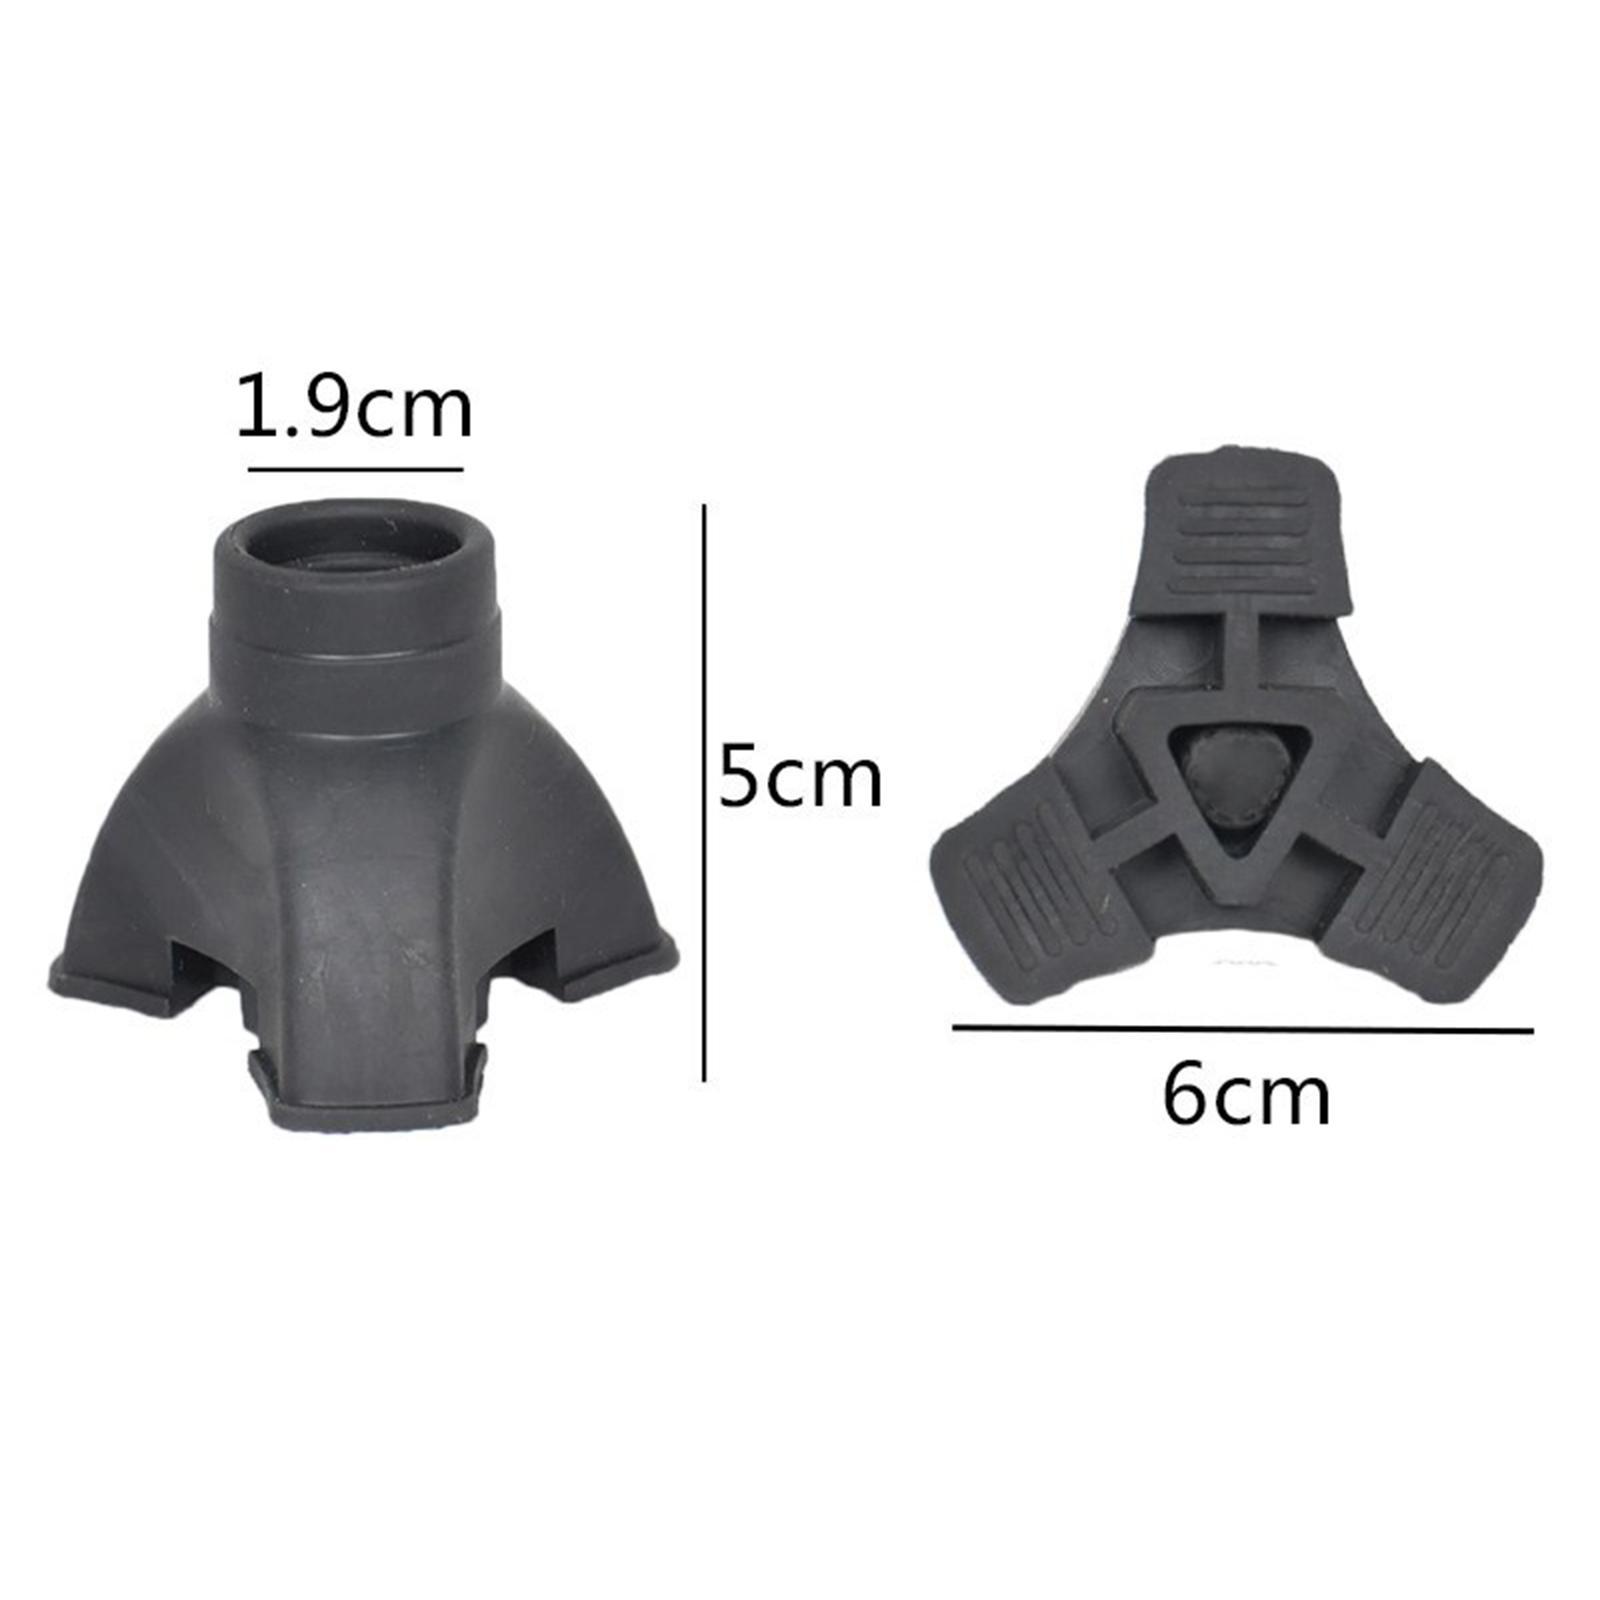 Walking Cane Tips Tripod Stand Cane, Replaces Parts ,Universal, Accessory Three Prong 0.75 inch Support Rubber Foot Pad for Hiking Poles